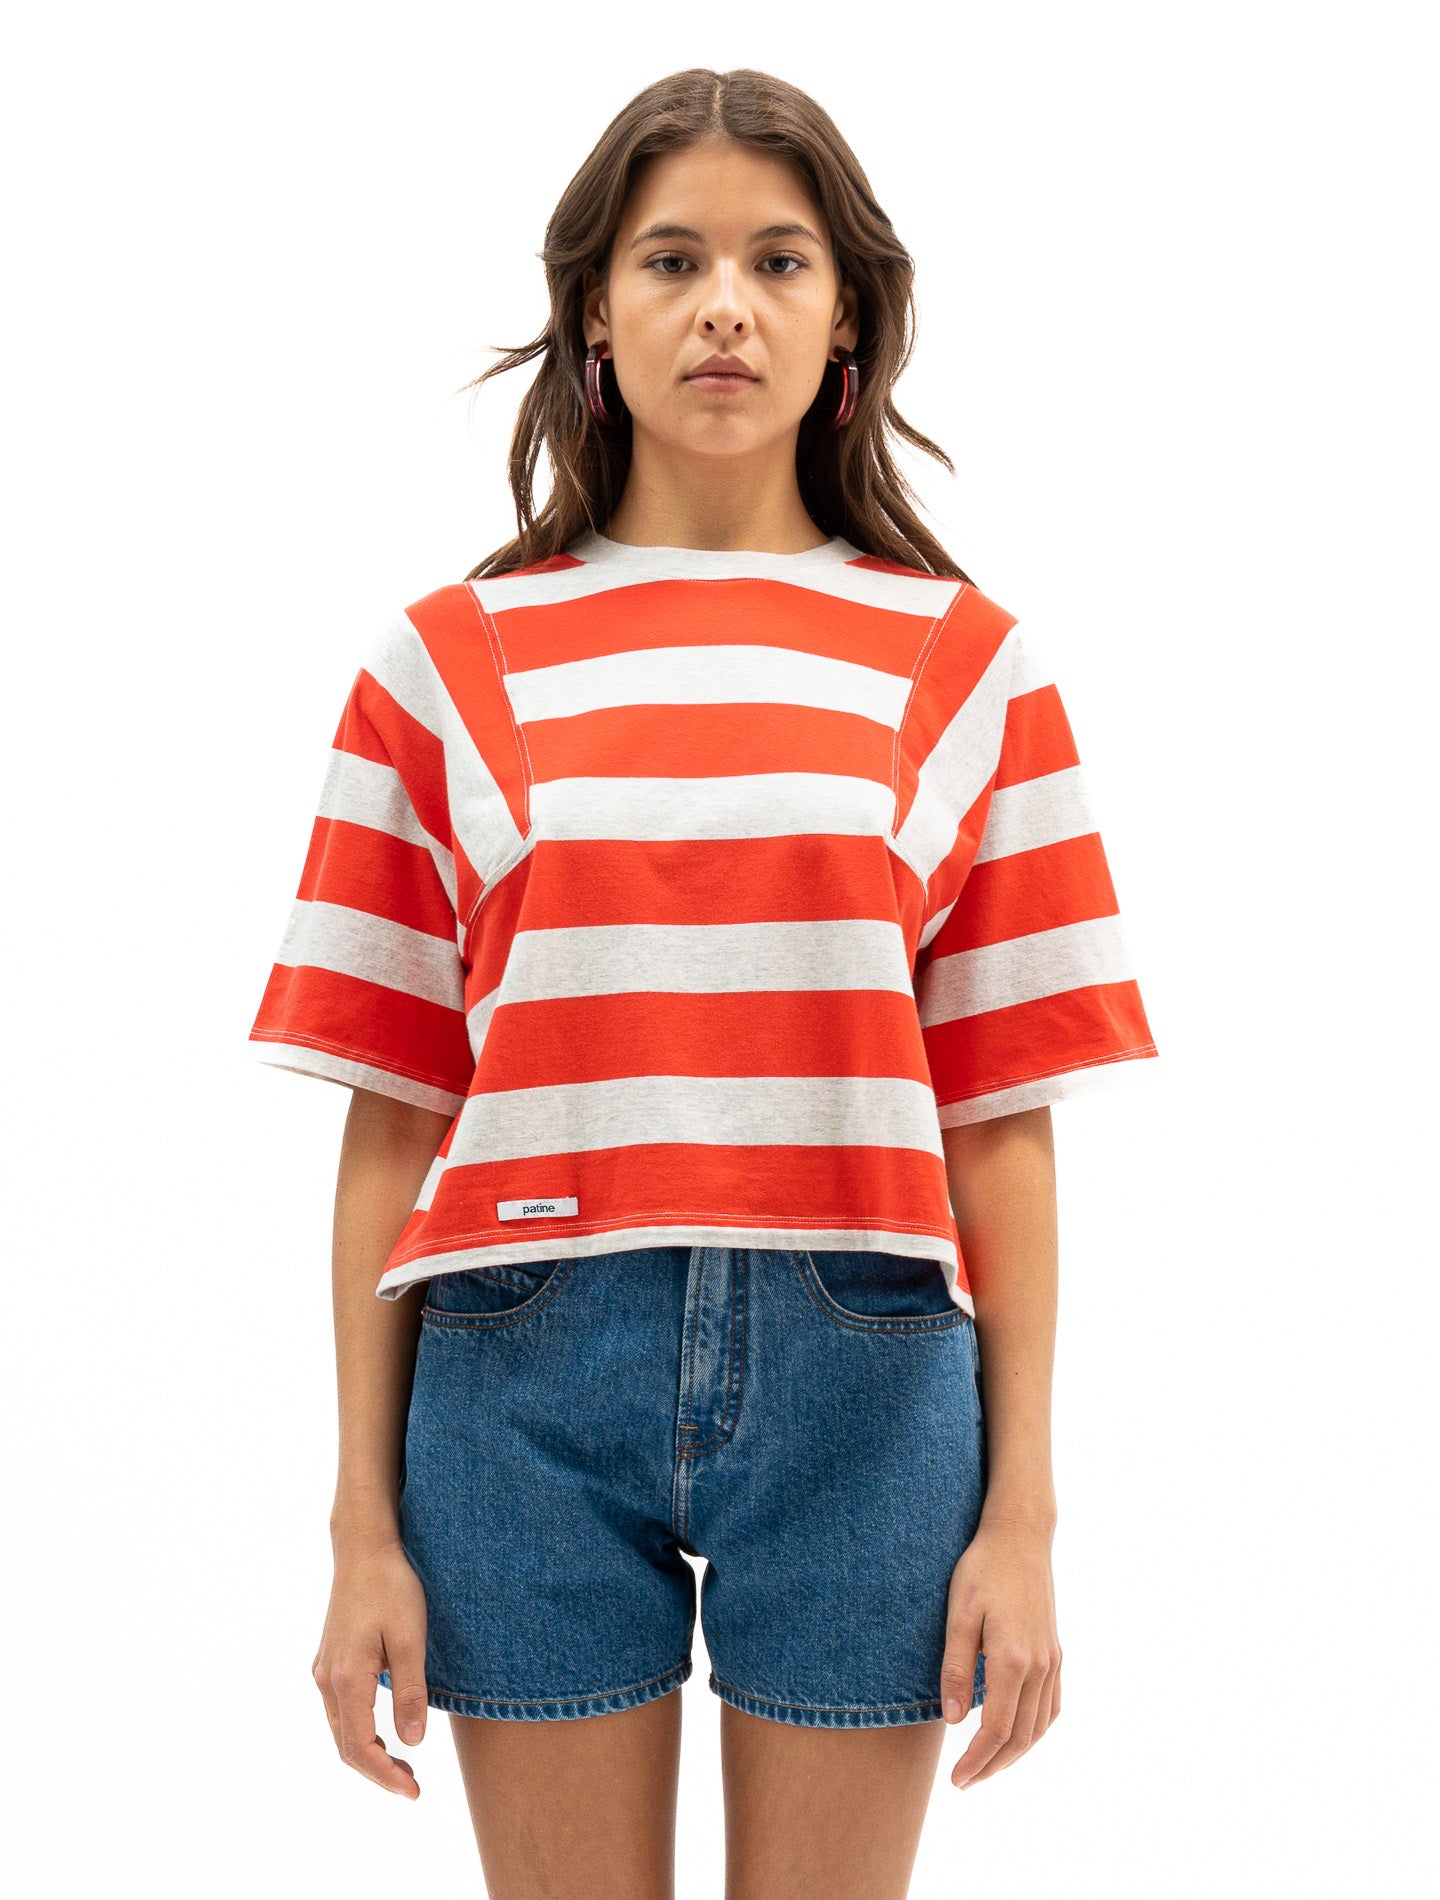 Le tee-shirt Boxy Willie® jersey bio-recyclé Rayures Rouge tomato